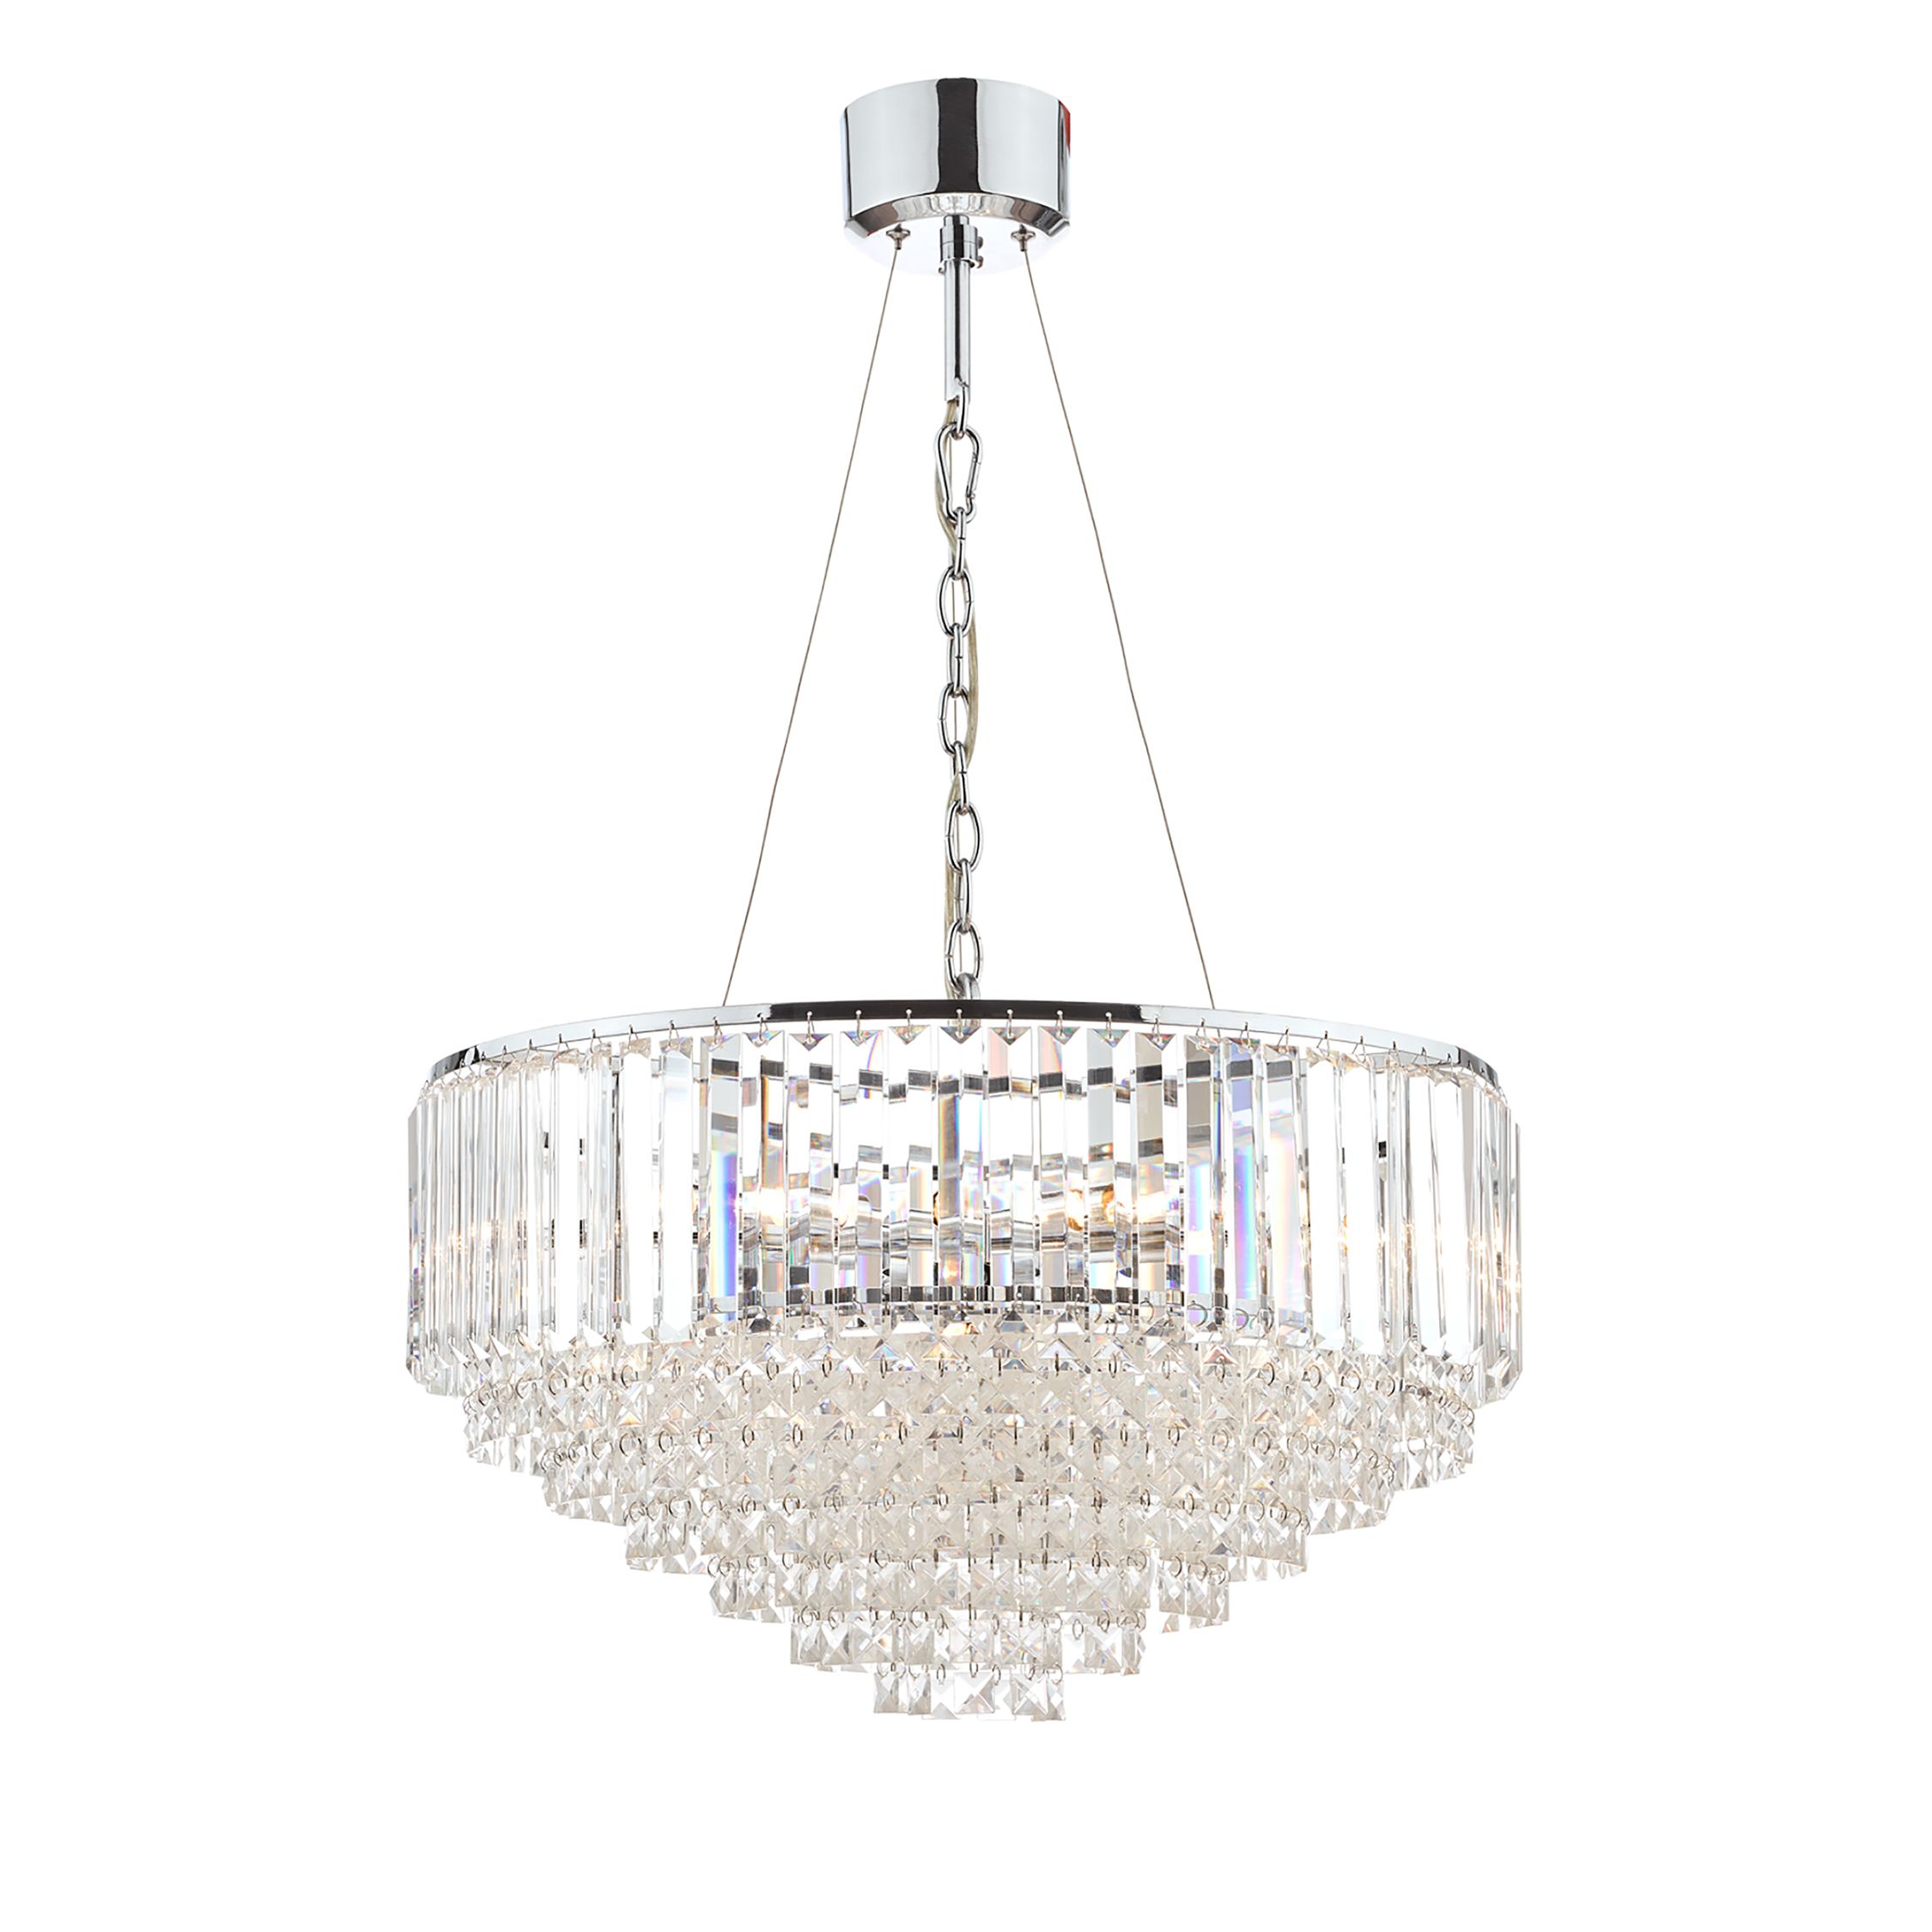 Photo of Laura ashley vienna grand crystal glass ceiling light clear/polished chrome